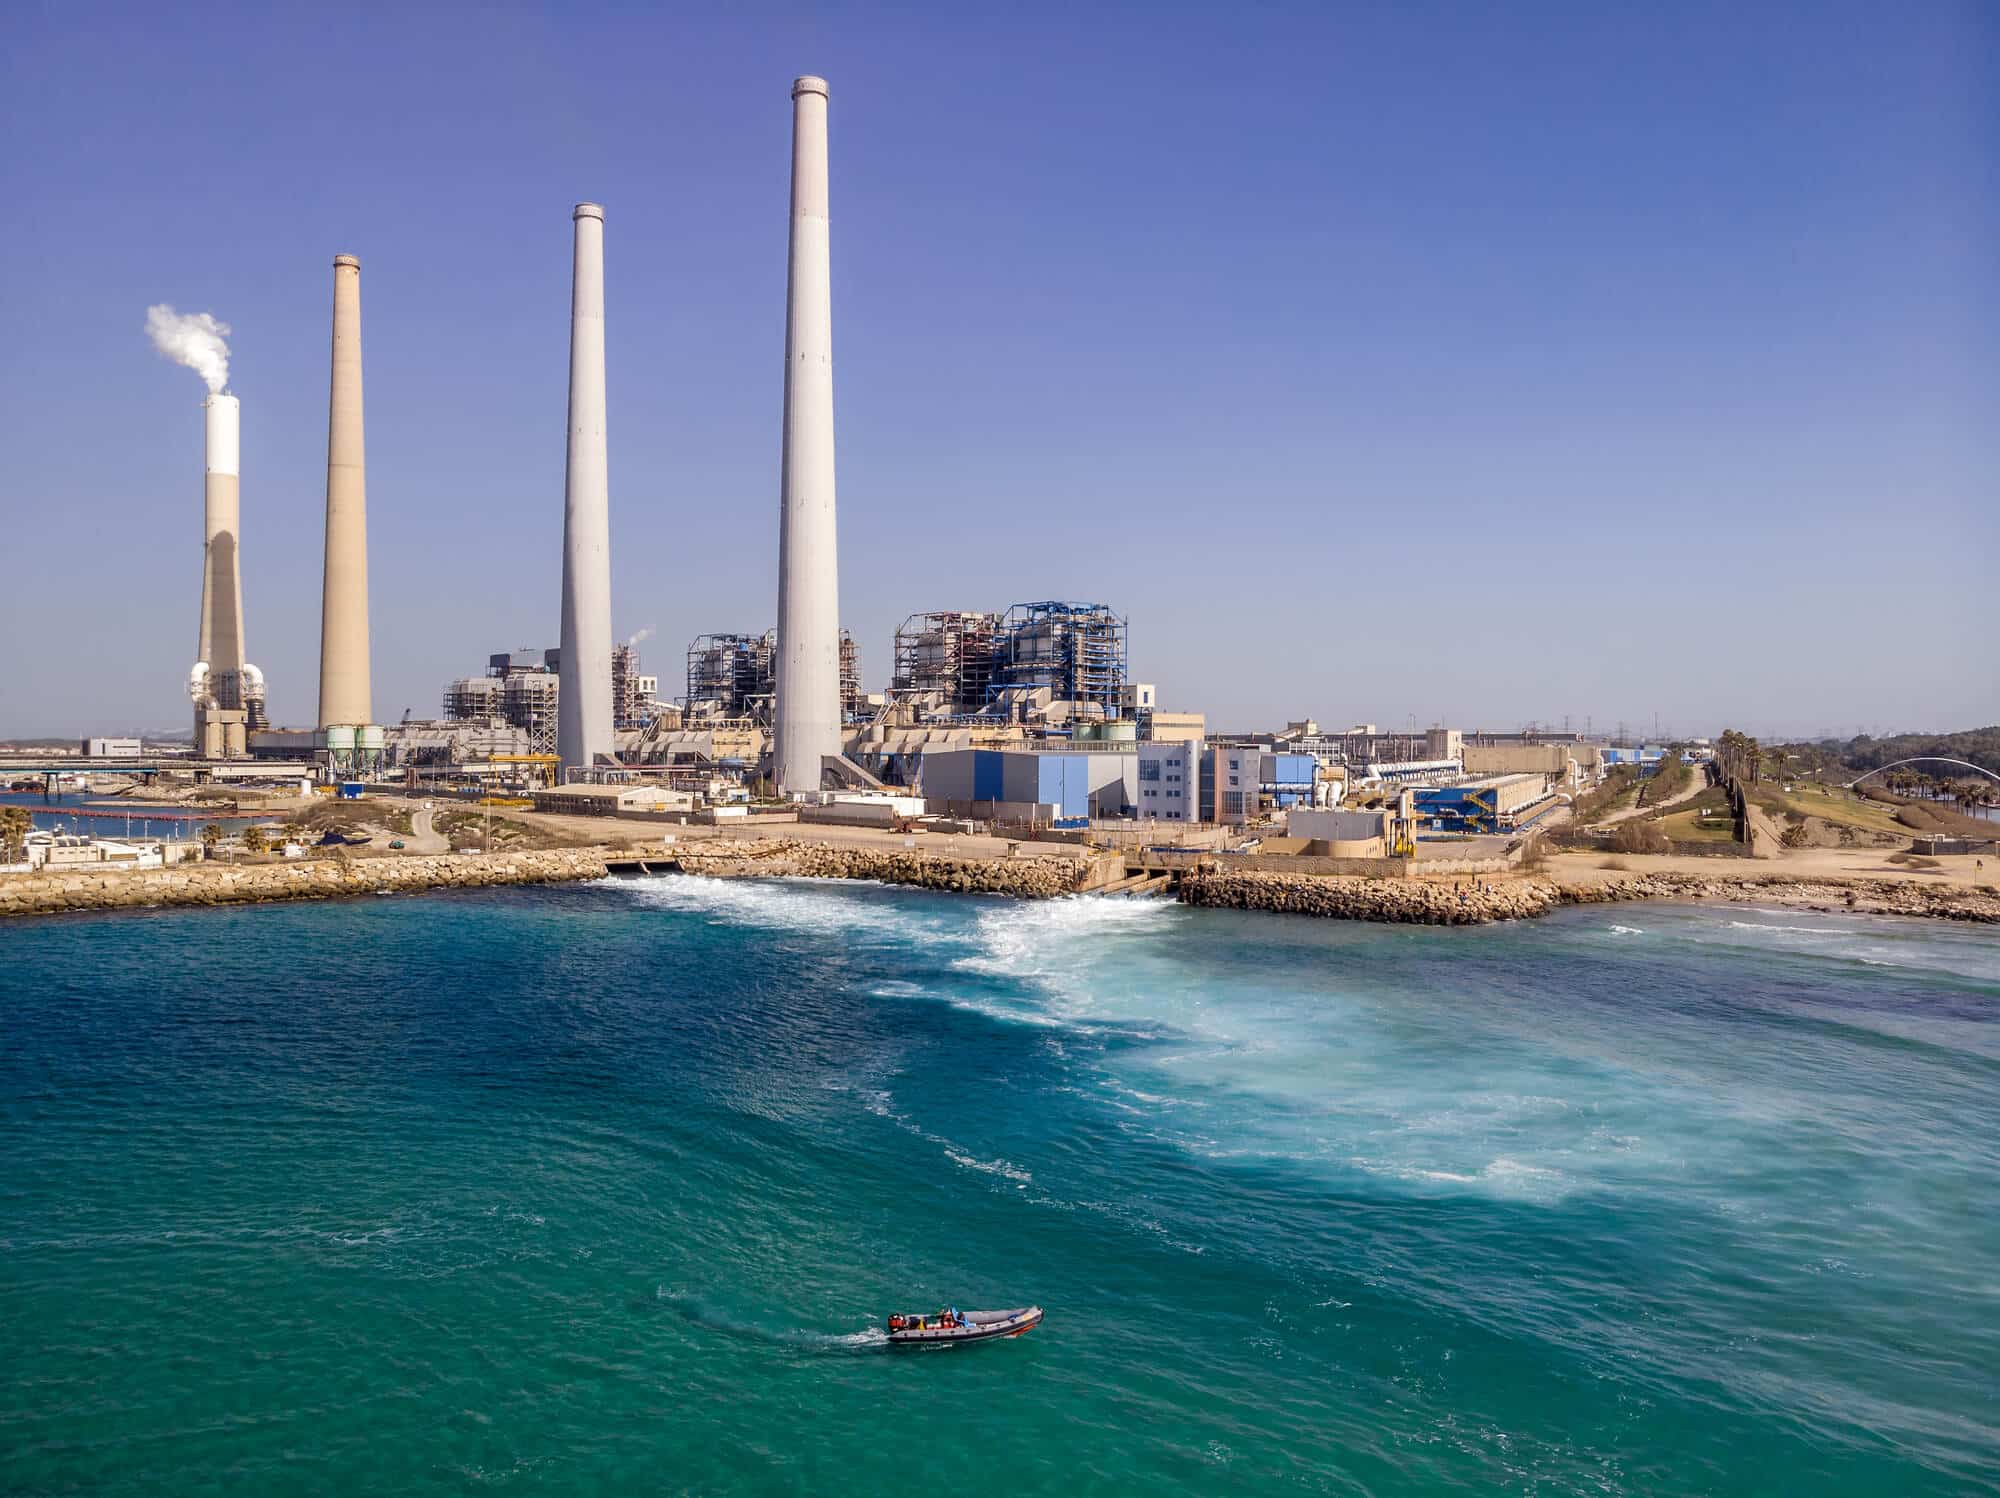 The Orot Rabin power plant in Hadera. The coal-fired units were supposed to be used only in an emergency but they still run continuously. Illustration: depositphotos.com